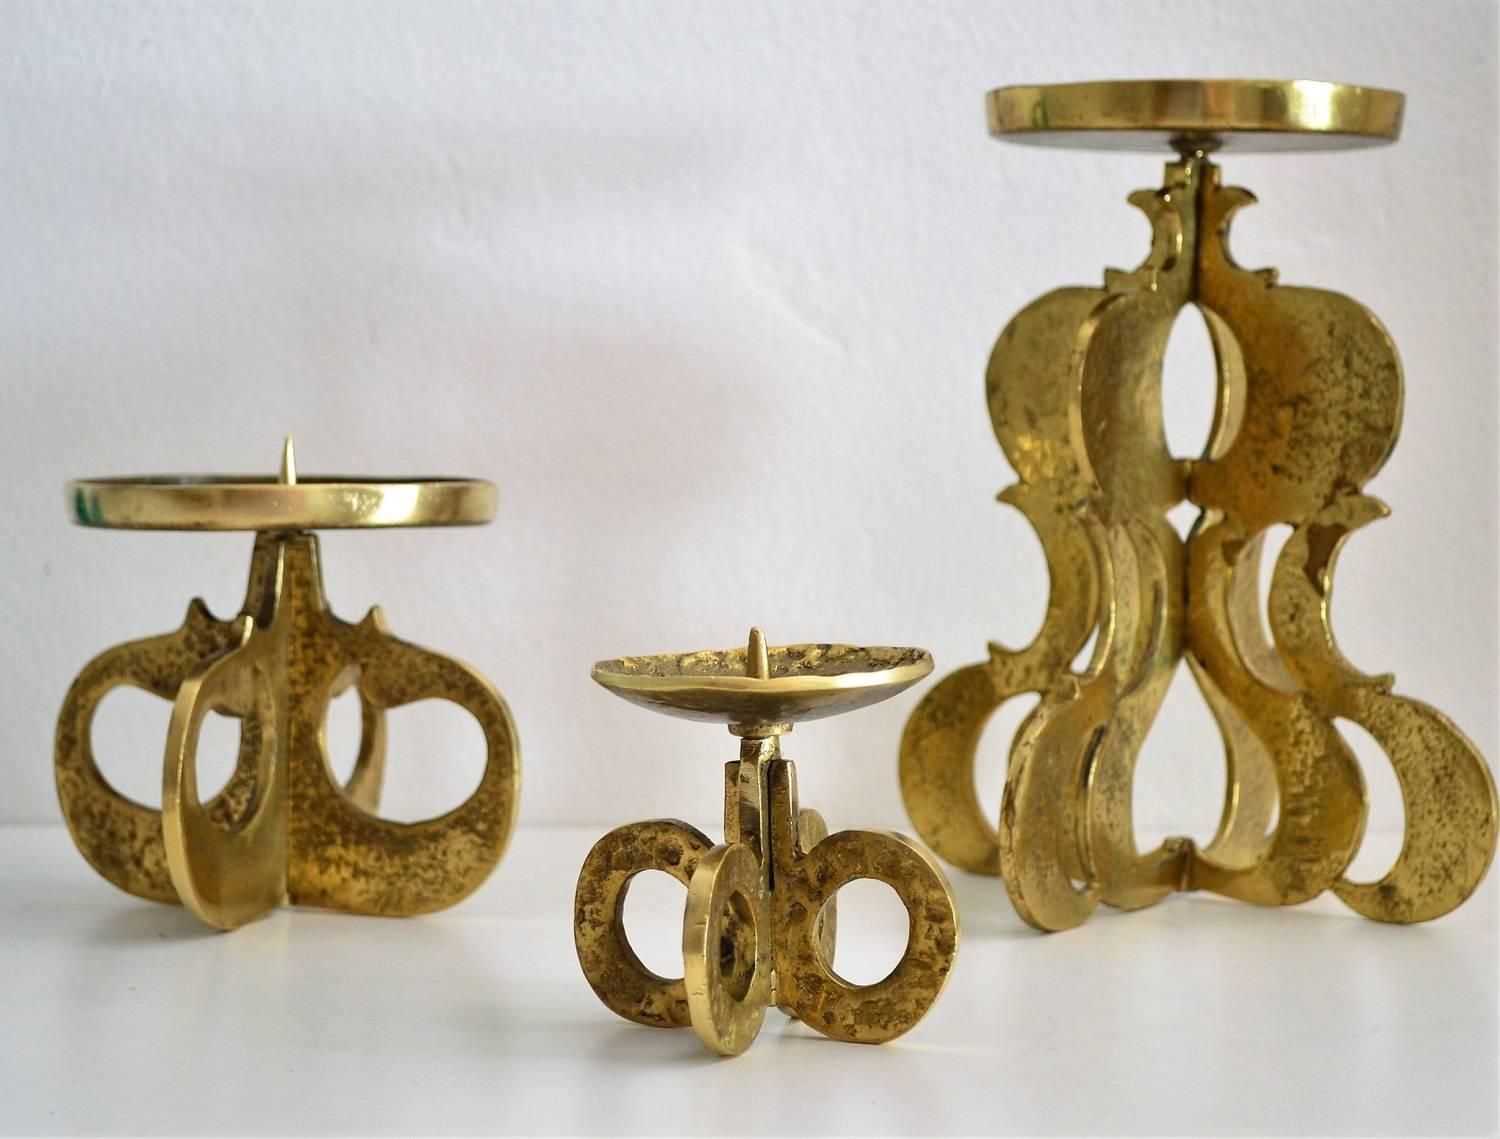 German Midcentury Candlestick Holder in Brass in the Brutalist Style, Set of three